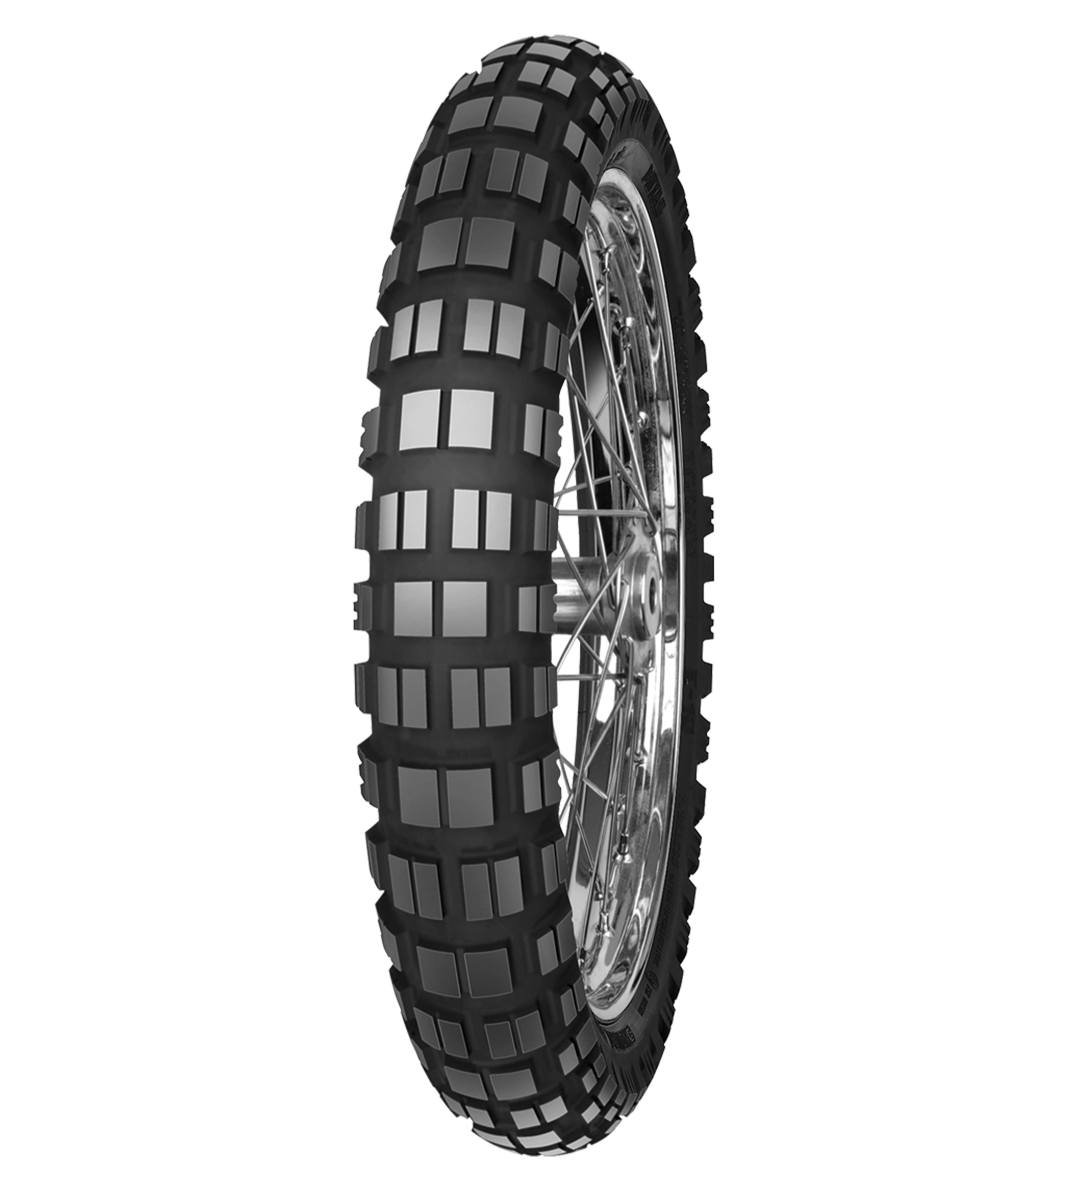 Mitas E-10 ENDURO 90/90B21 Trail OFF Trail 54T No Stripe Tubeless Front Tire, 224655, 90/90B21, Adventure Touring, E Series, E-10 Enduro, Front, Trail, Trail OFF, Tires - Imported and distributed in North & South America by Lindeco Genuine Powersports - Premier Powersports Equipment and Accessories for Motorcycle Enthusiasts, Professional Riders and Dealers.